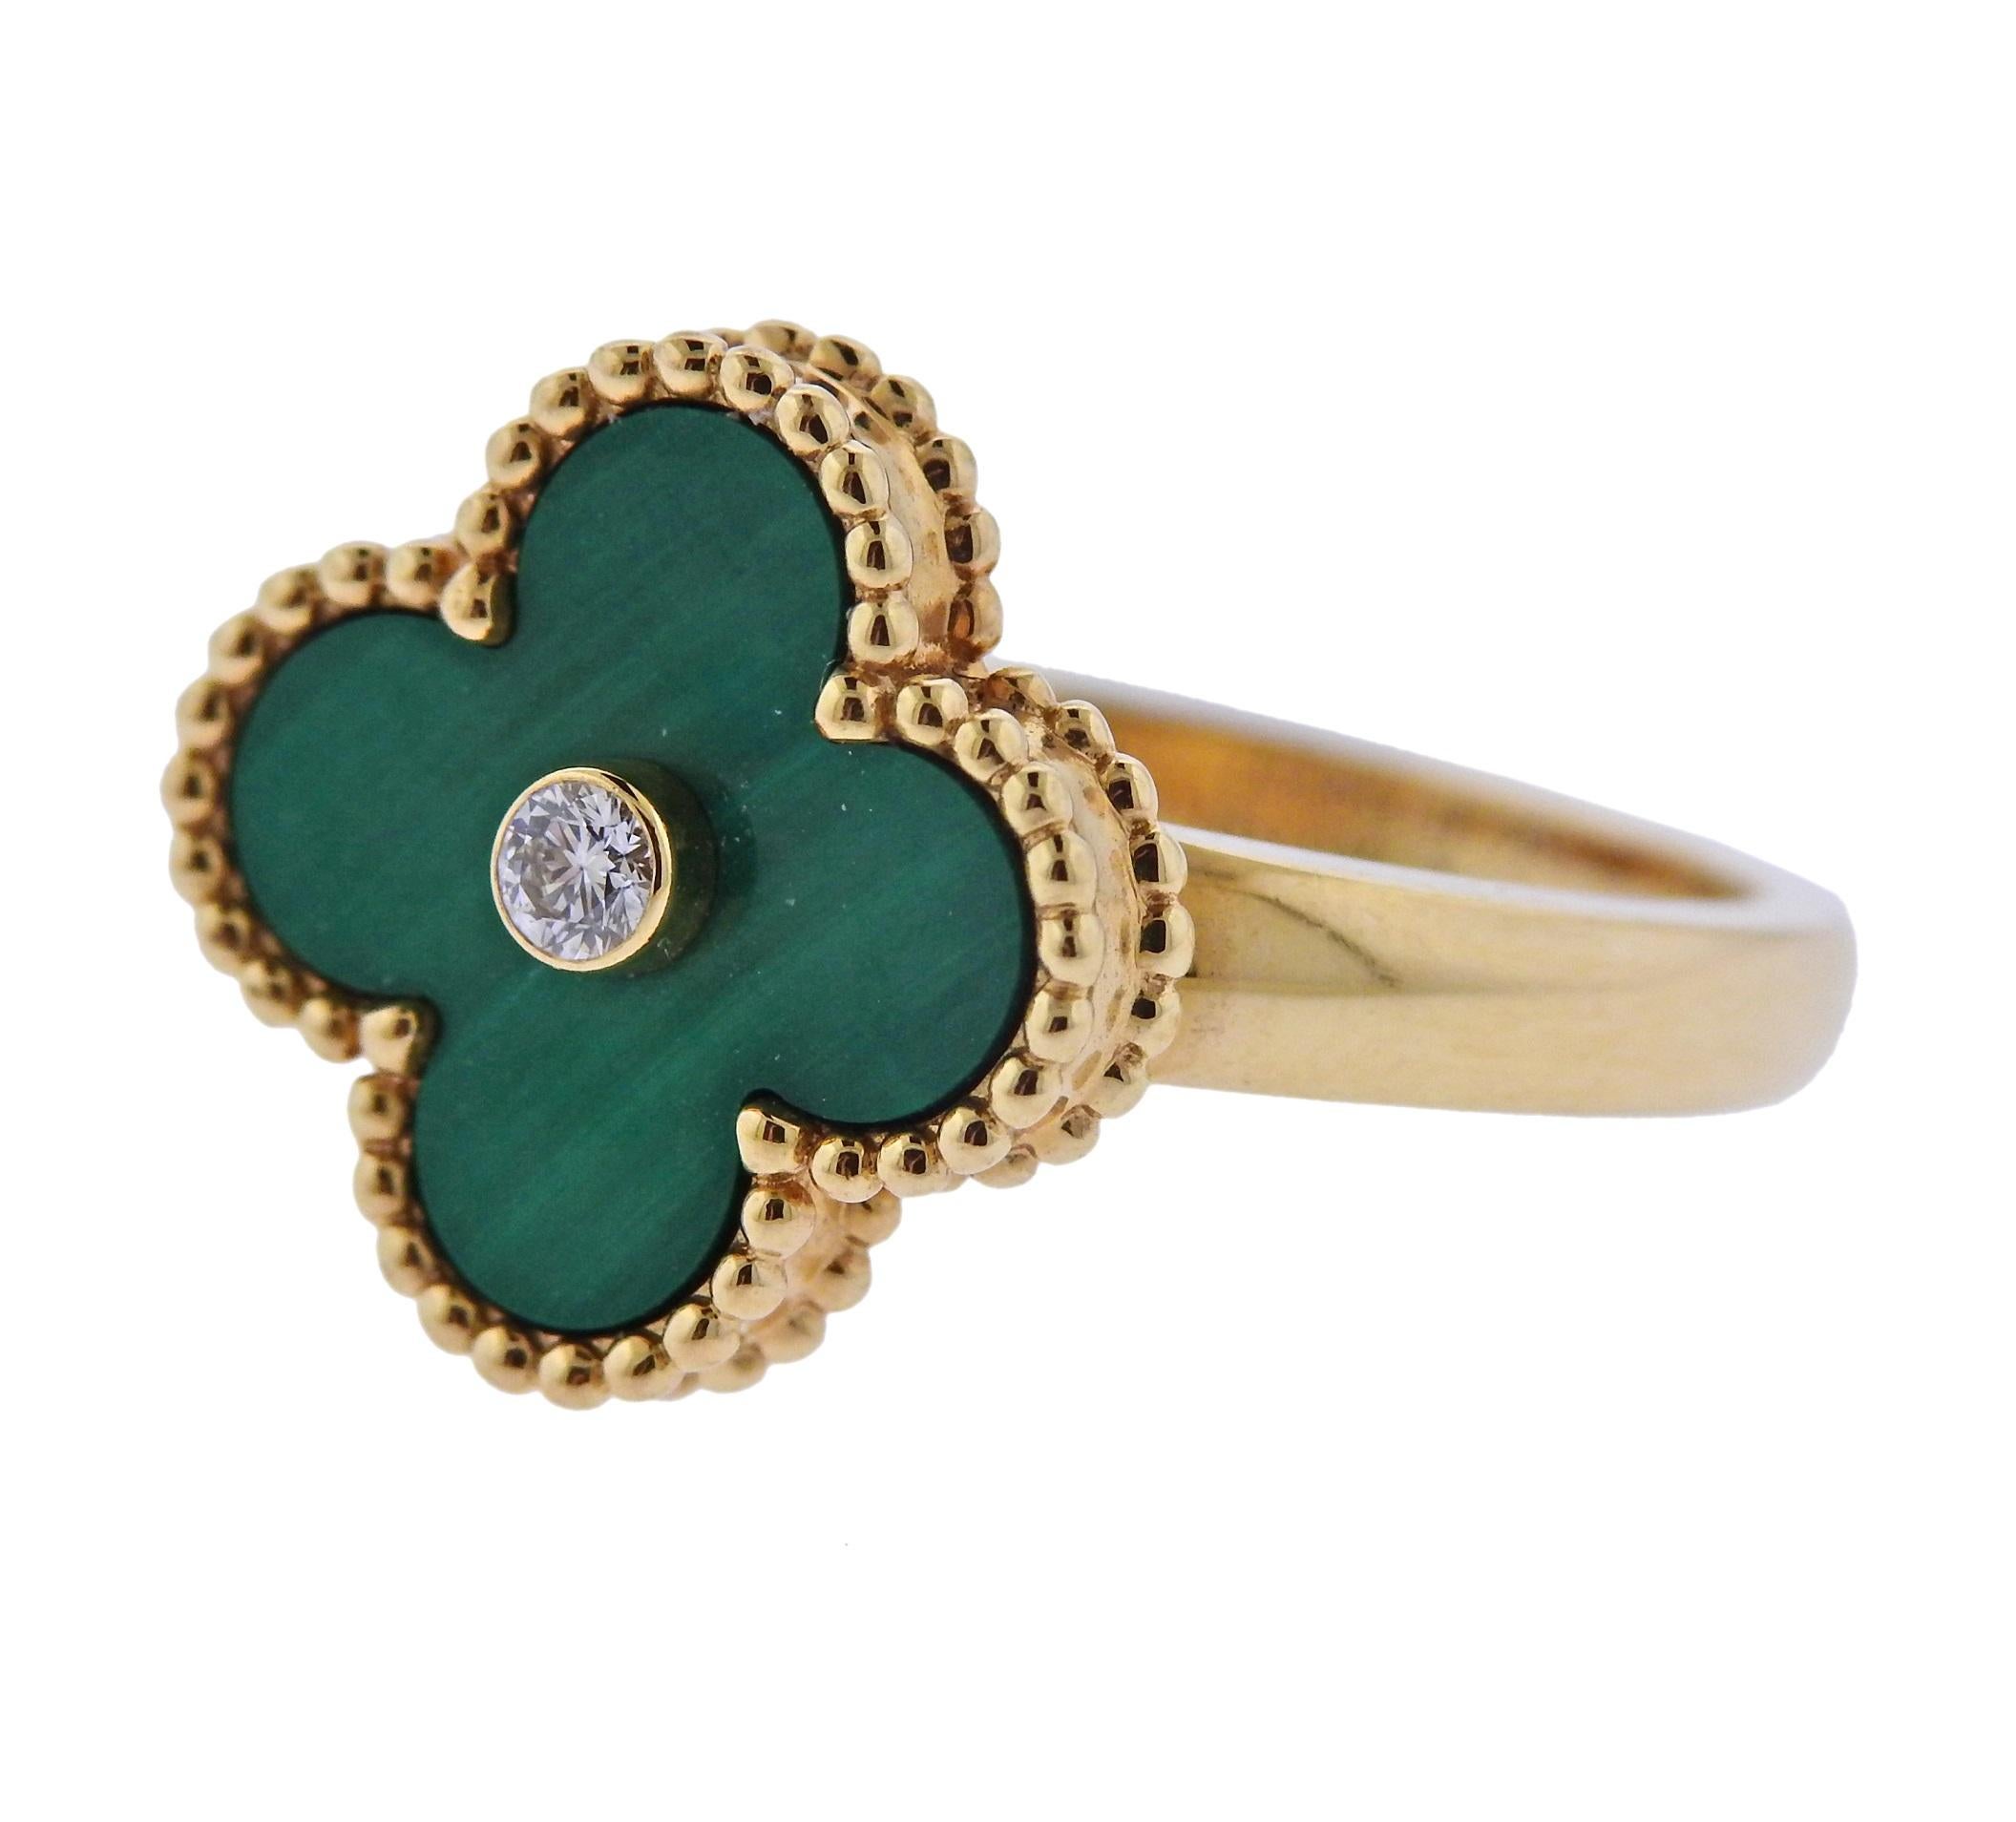 Iconic Vintage Alhambra 18k gold ring, set with approx. 0.06ct FG/VVS diamond in the center and malachite top. Crafted by Van Cleef & Arpels, come with COA.  Ring size - 7, ring top - 15mm x 15mm, weighs 6.6 grams. Marked:  VCA, Au750, 54, JE798***.